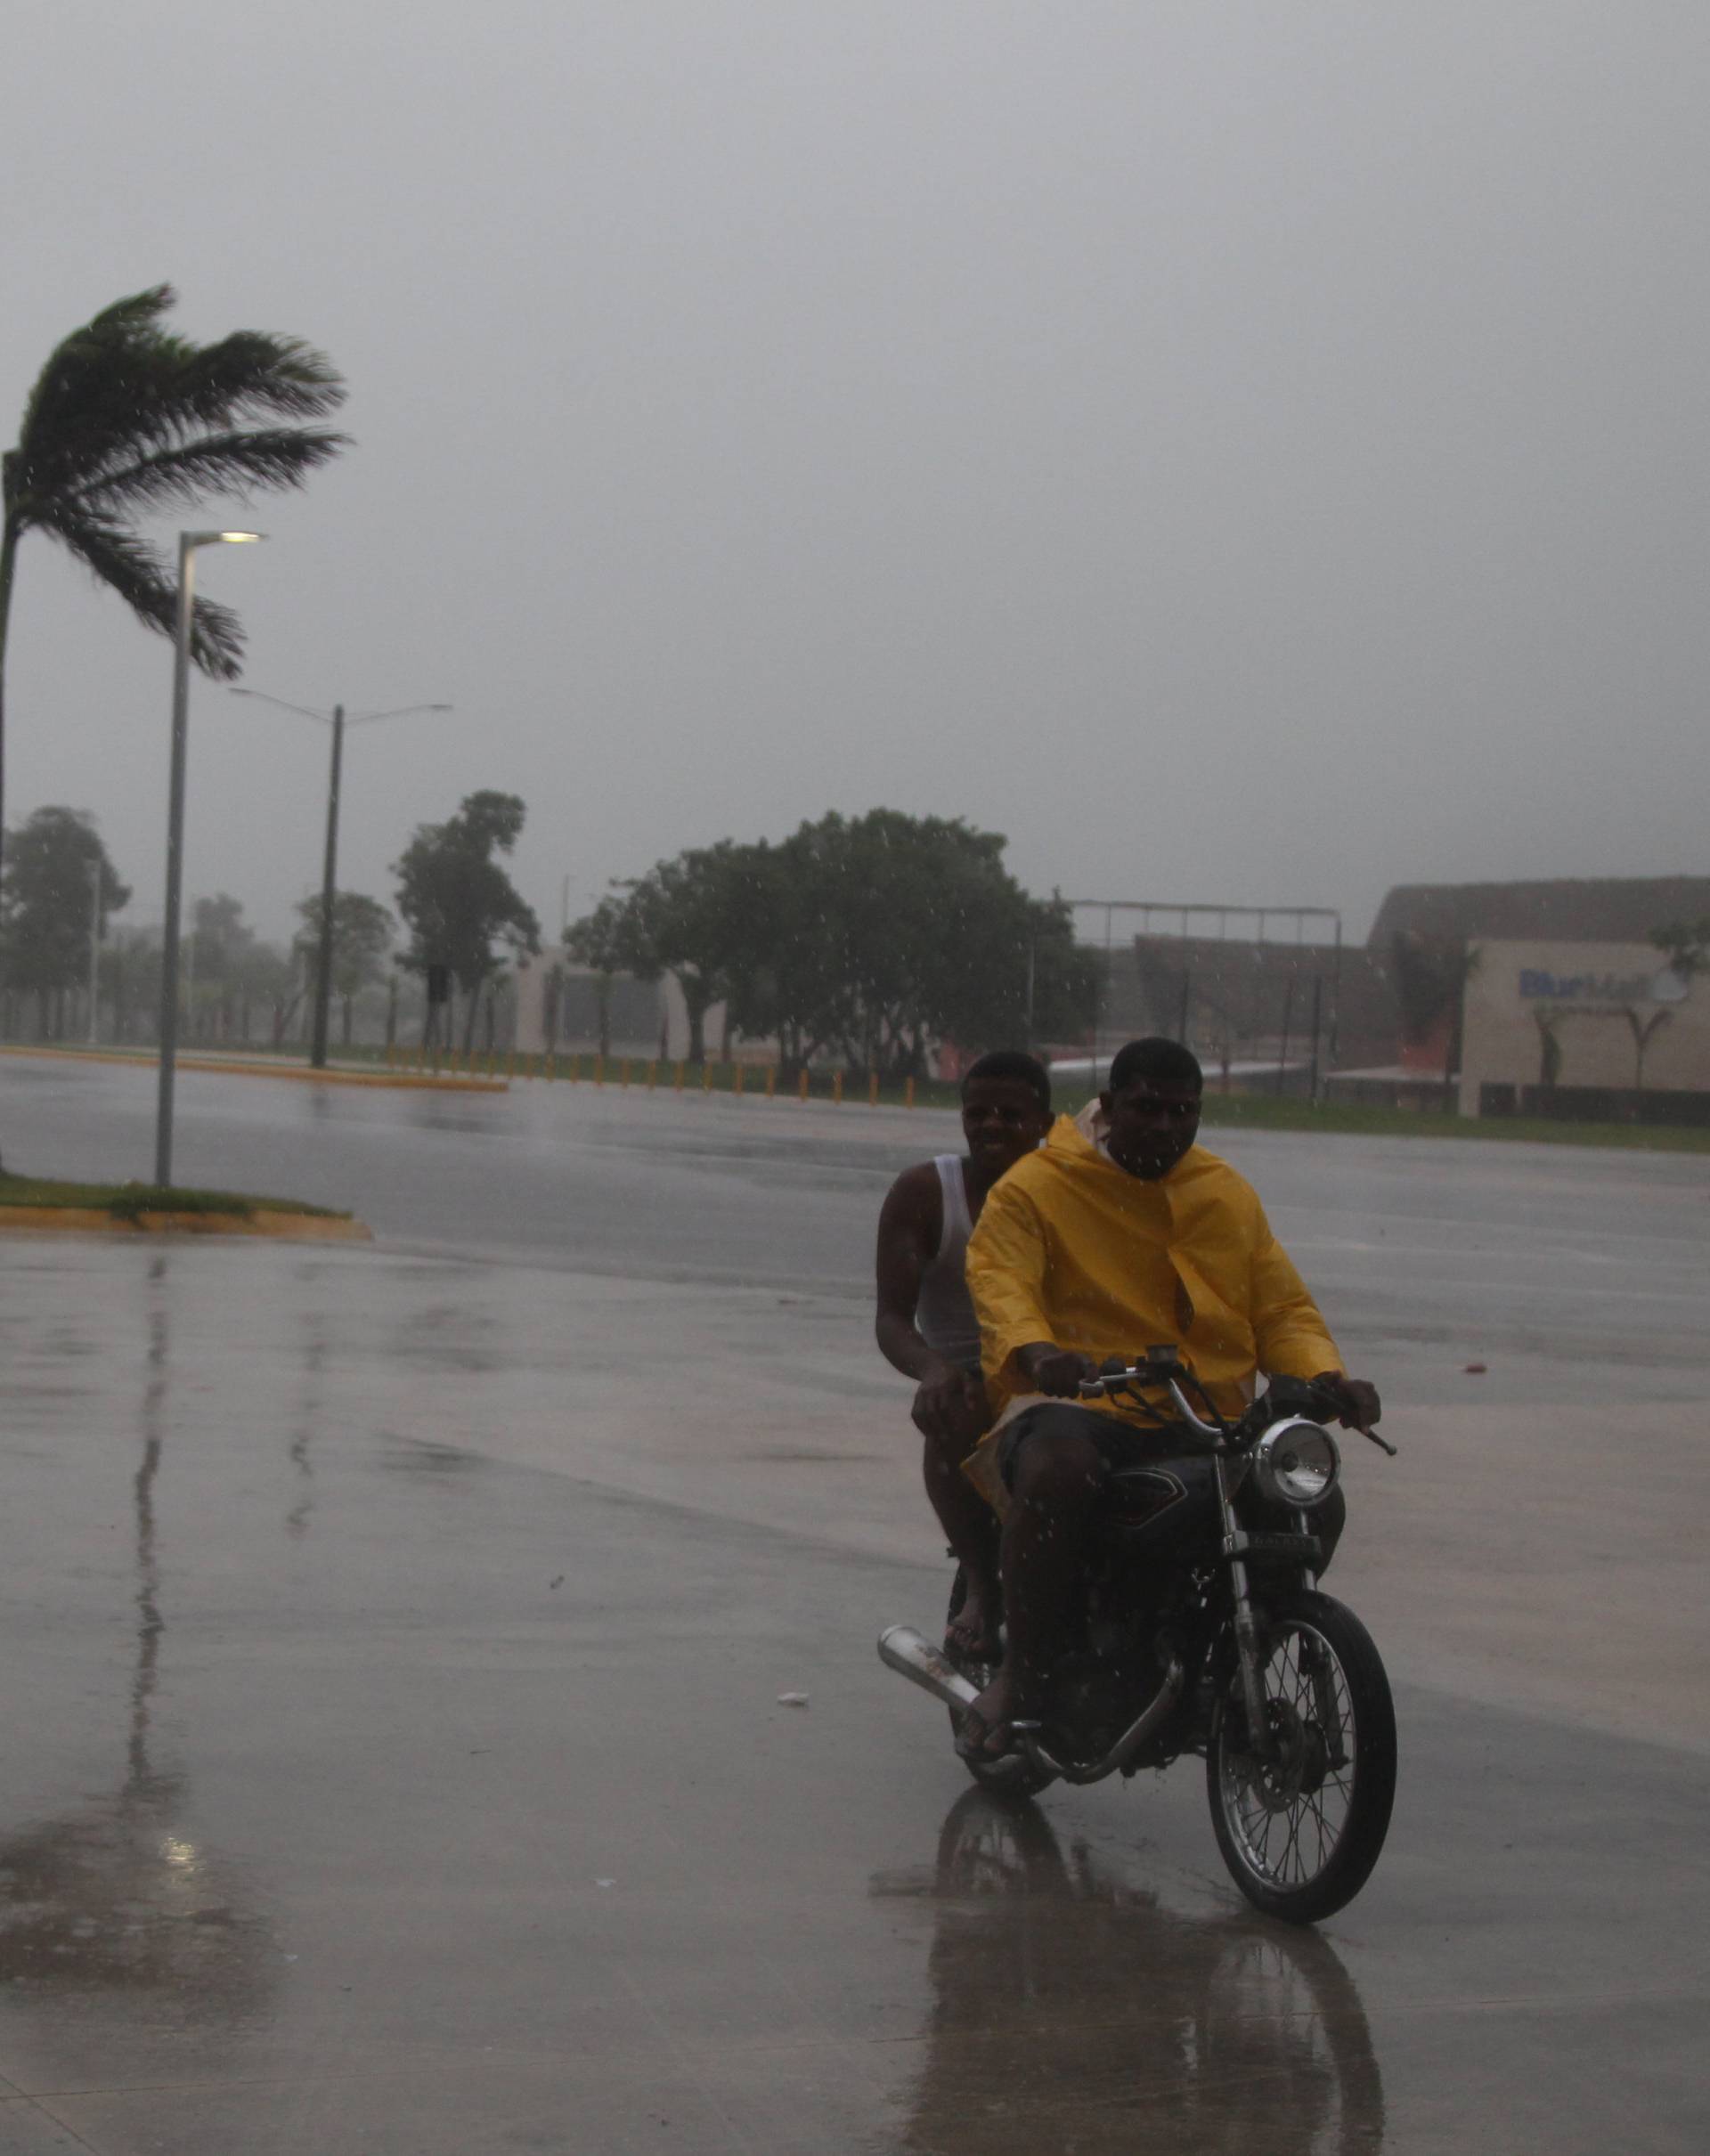 People ride a motorbike on the street before the arrival of Hurricane Maria in Punta Cana